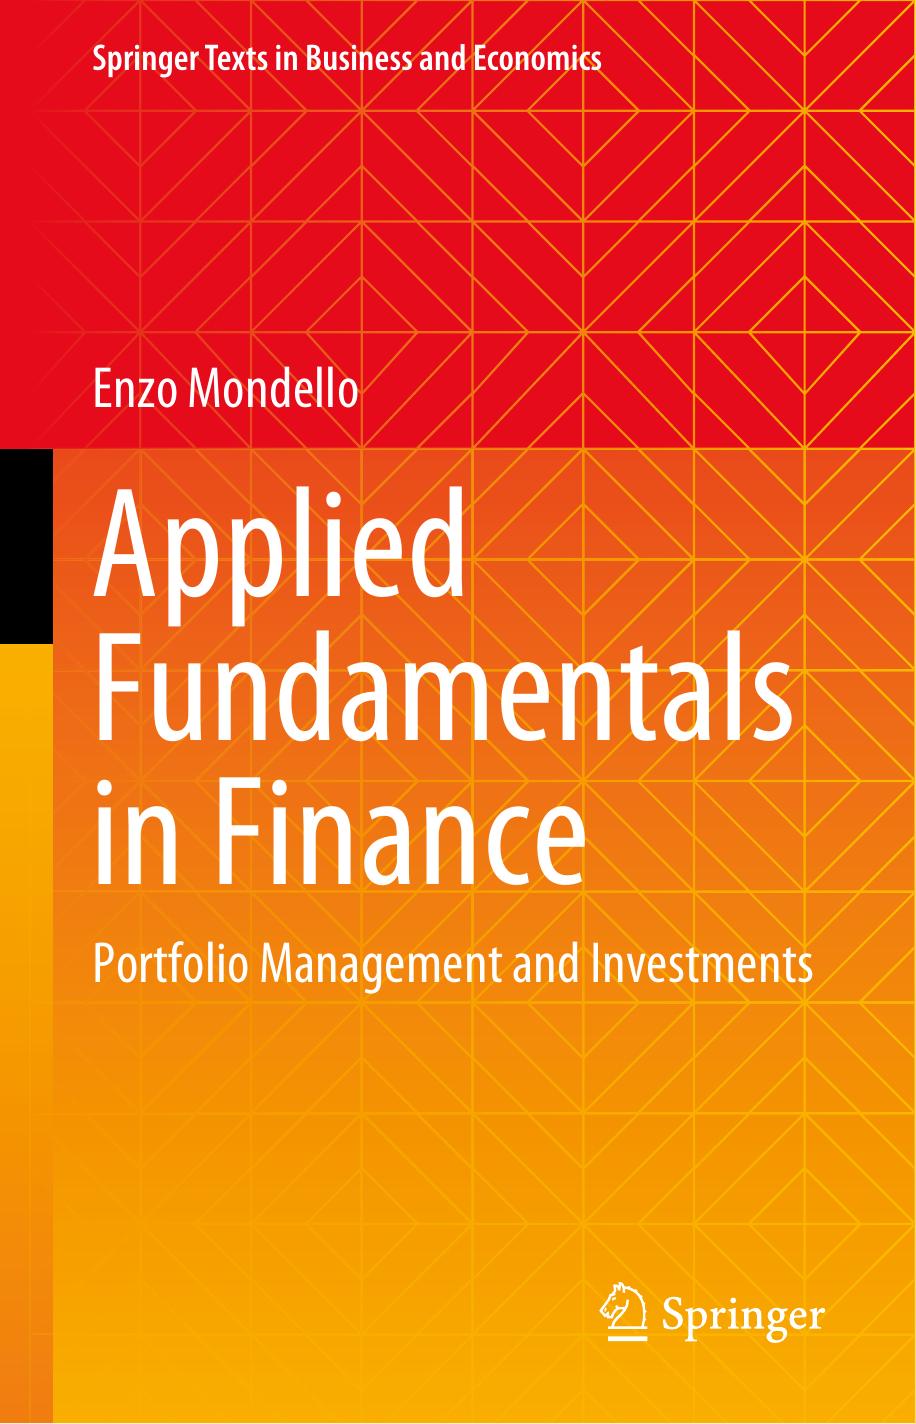 Applied Fundamentals in Finance: Portfolio Management and Investments by Enzo Mondello